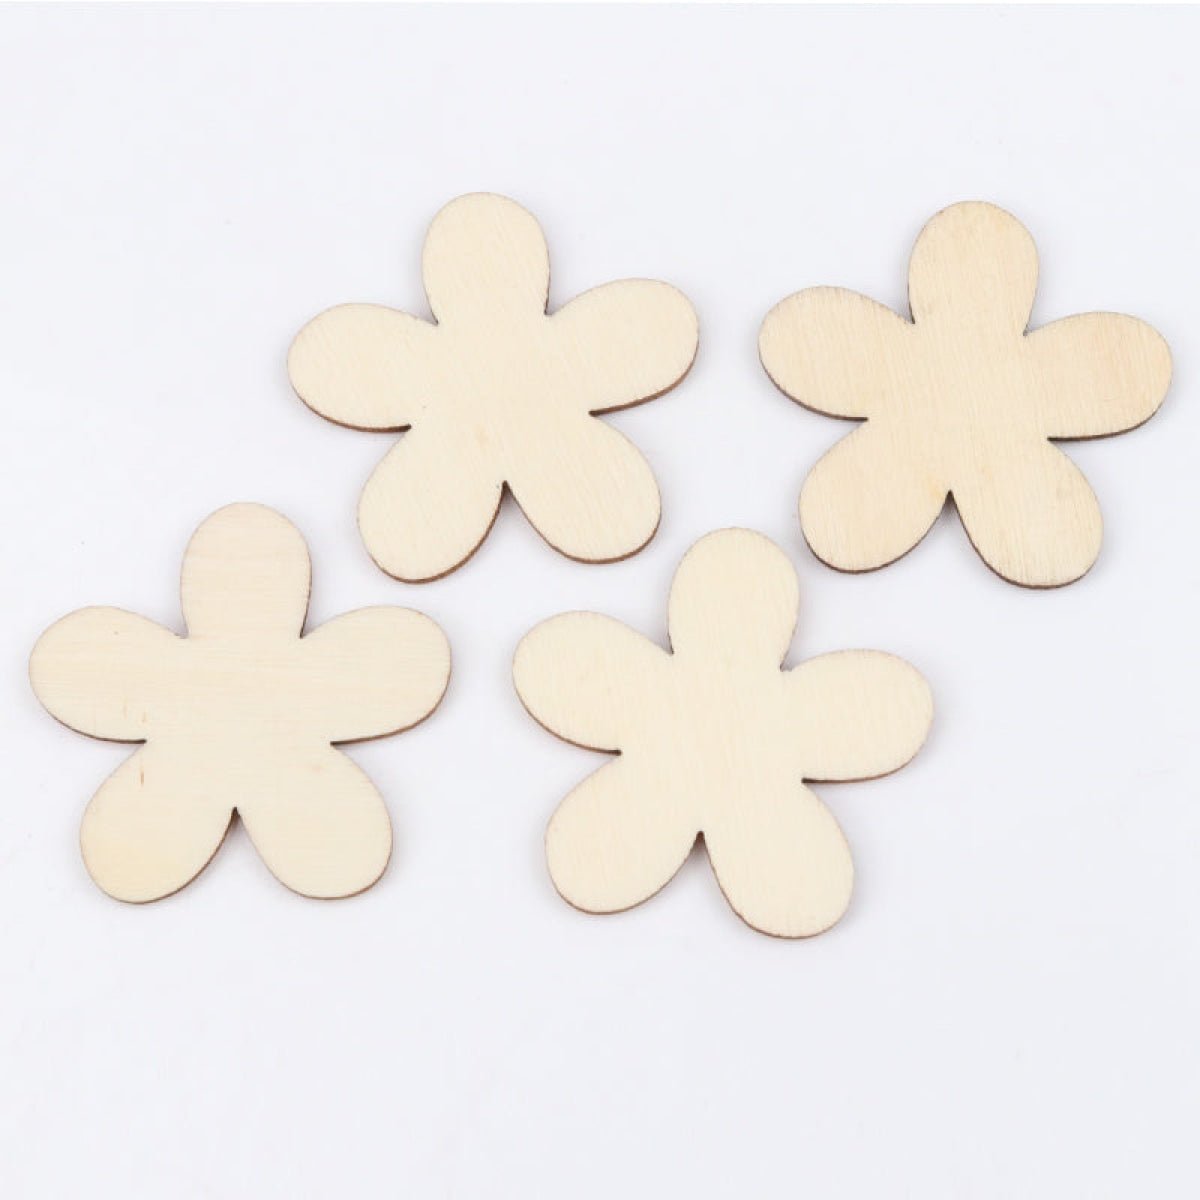 50pcs 15/20/25/35mm Natural Wooden Flower Pattern Blanks Scrapbooking Home Arts Crafts Sketching - 15mm - - Asia Sell